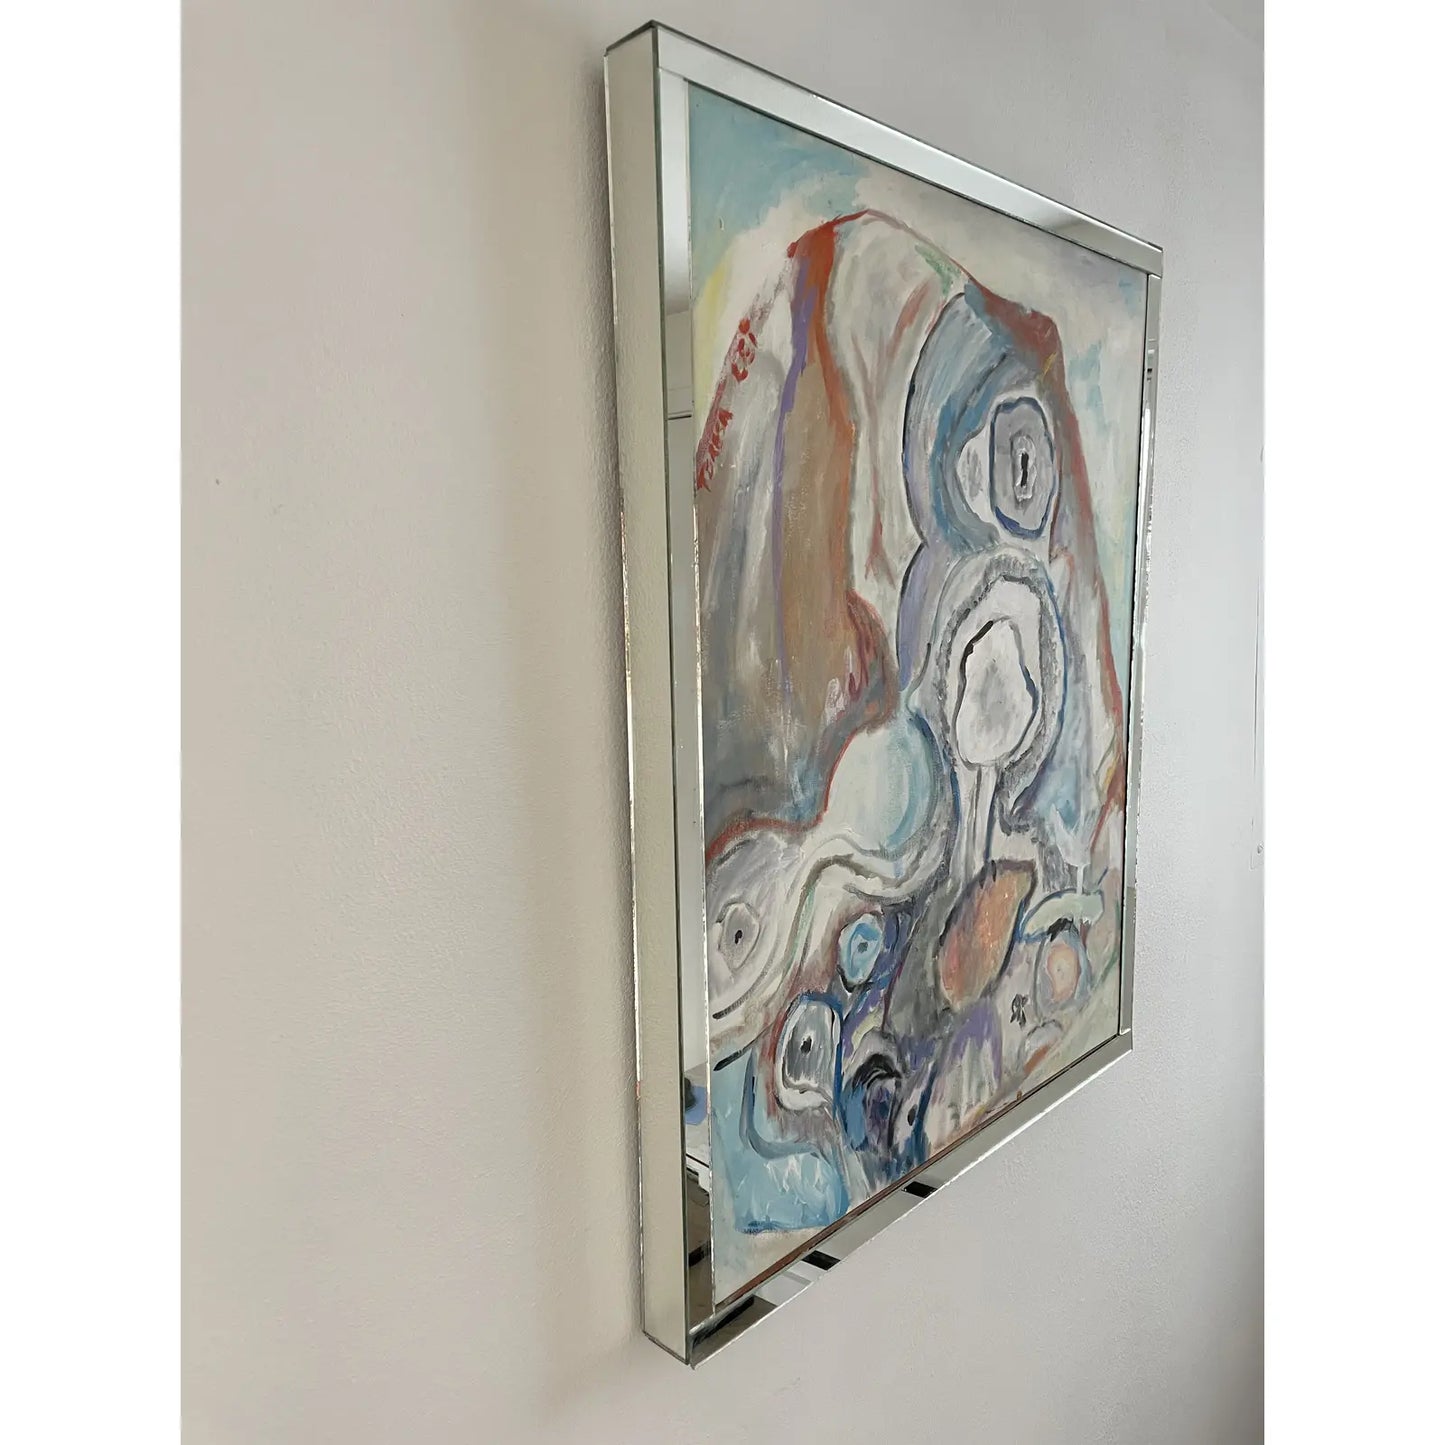 Vintage Signed Abstract Flowing Forms Acrylic Painting on Canvas Board by Teresa Lawrenson Handmade Mirror Frame